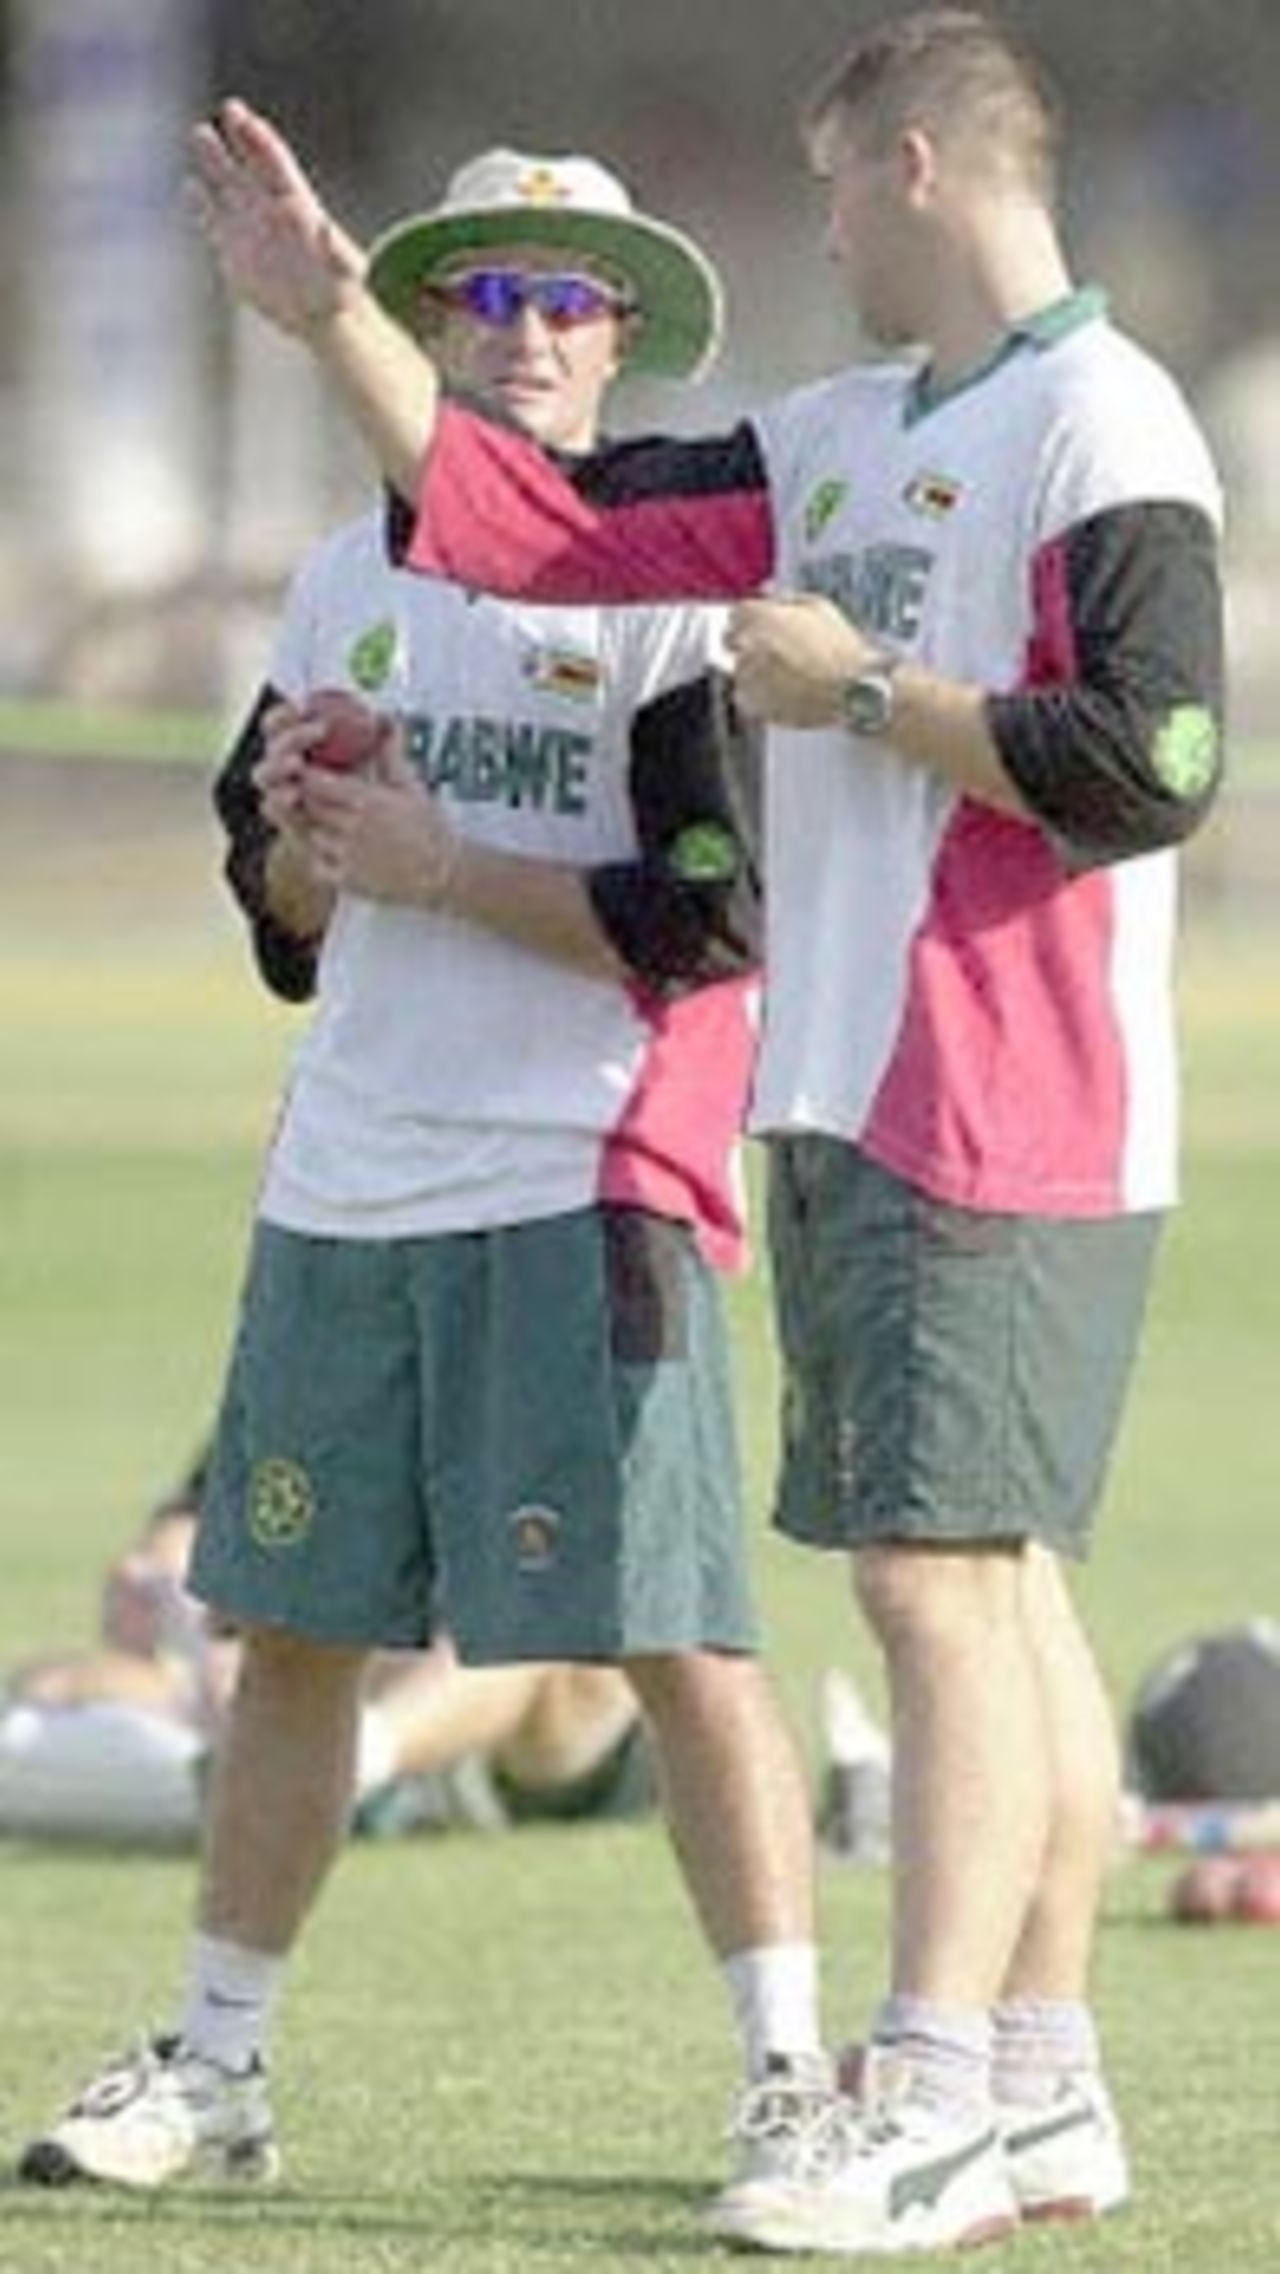 Zimbabwe cricket team captain Heath Streak (R) gives a few tips to teammate Dirk Viljoen during a practise session in Nagpur, 24 November 2000 on the eve of the second test  match between India and Zimbabwe. India won the first test match to take a 1-0 lead in the two- match-series.